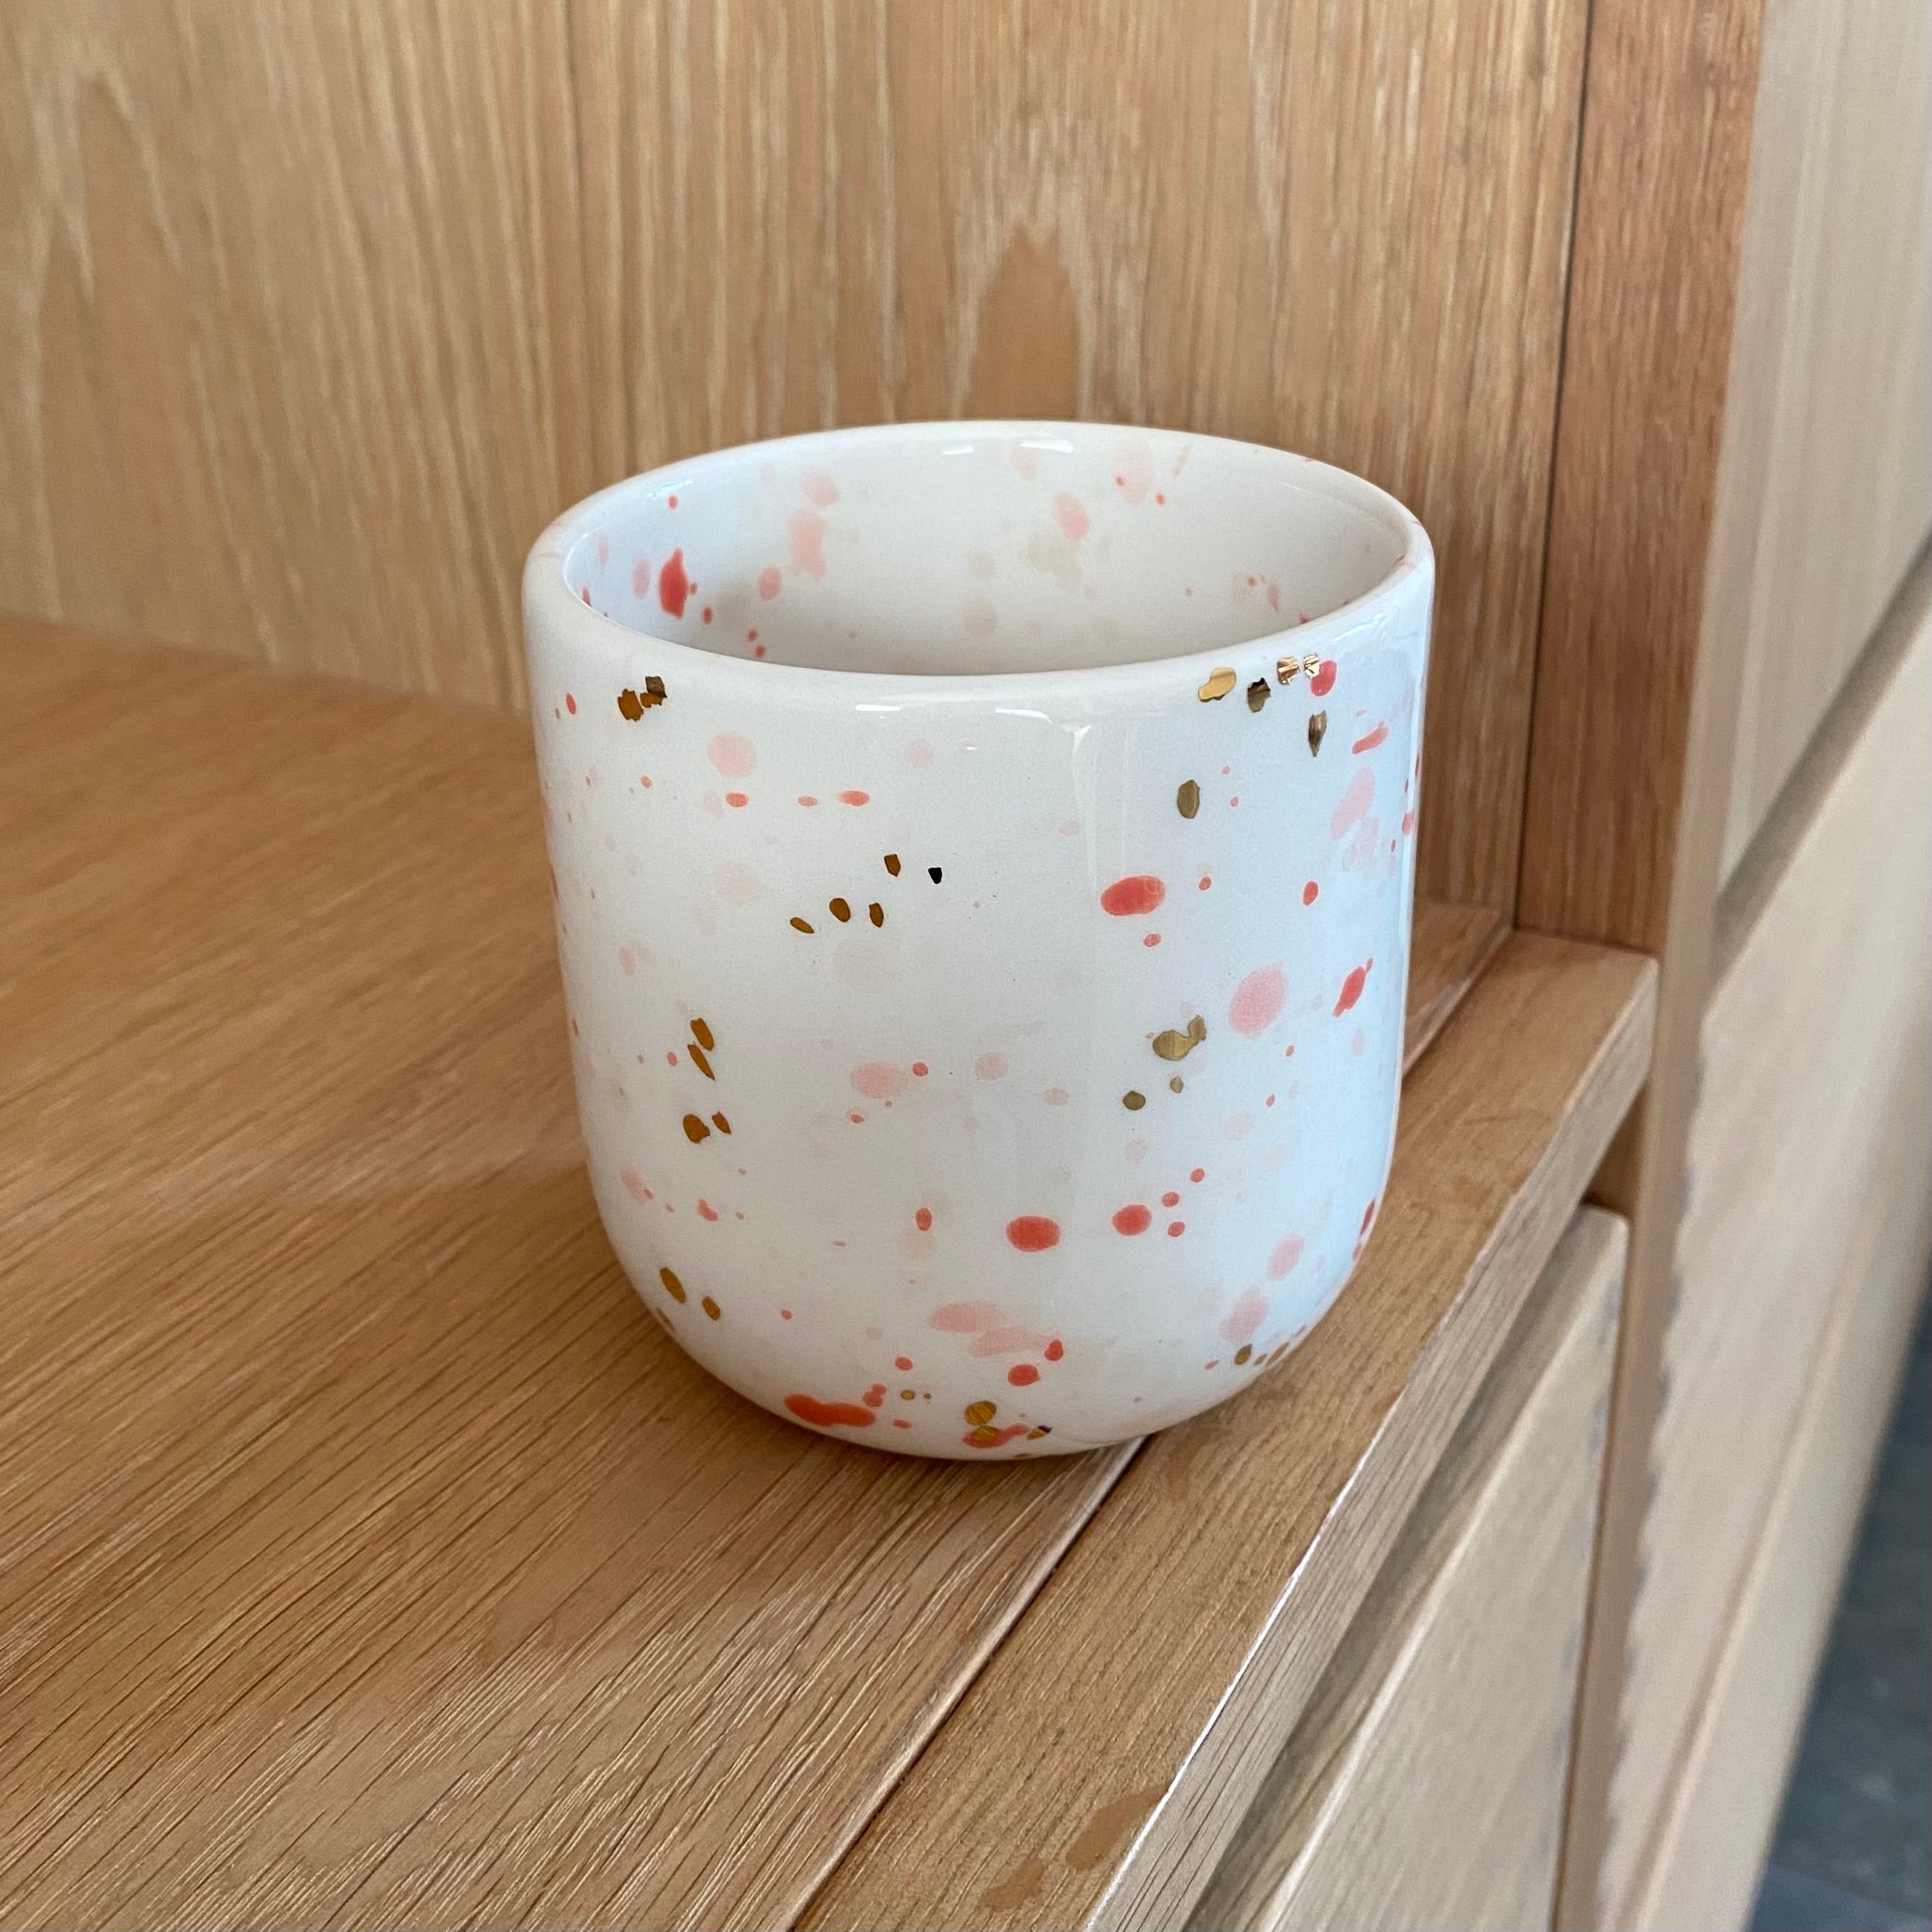 Marinski Heartmade latte cup speckles - coral, pink and gold